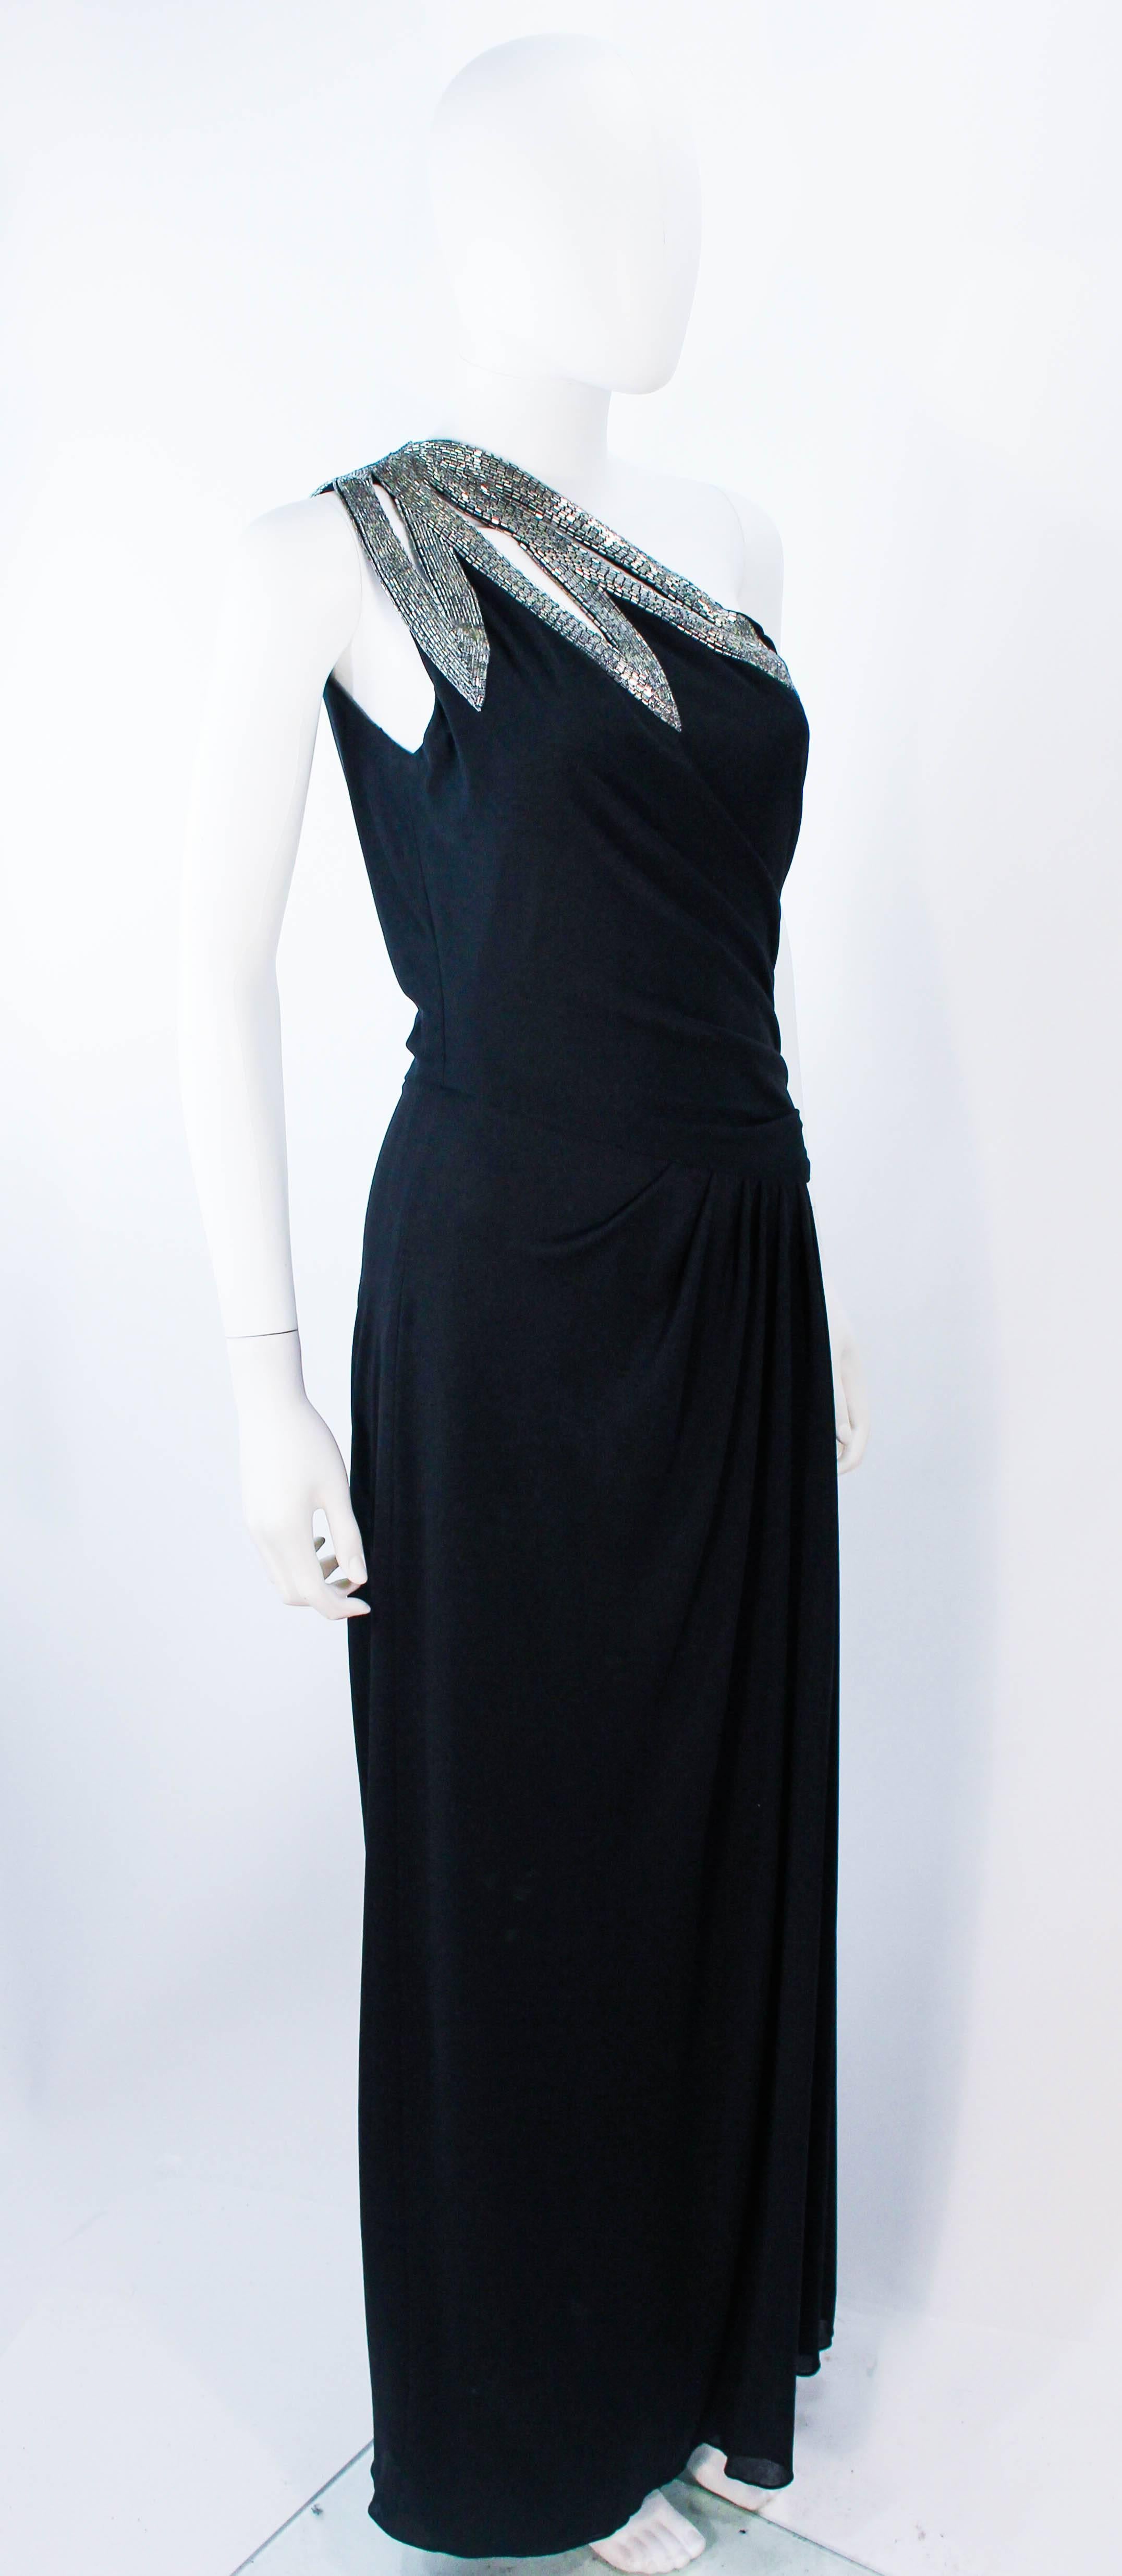 TRAVILLA 1970's Black Draped Jersey Gown with Silver Beaded Applique Size 8 10 1